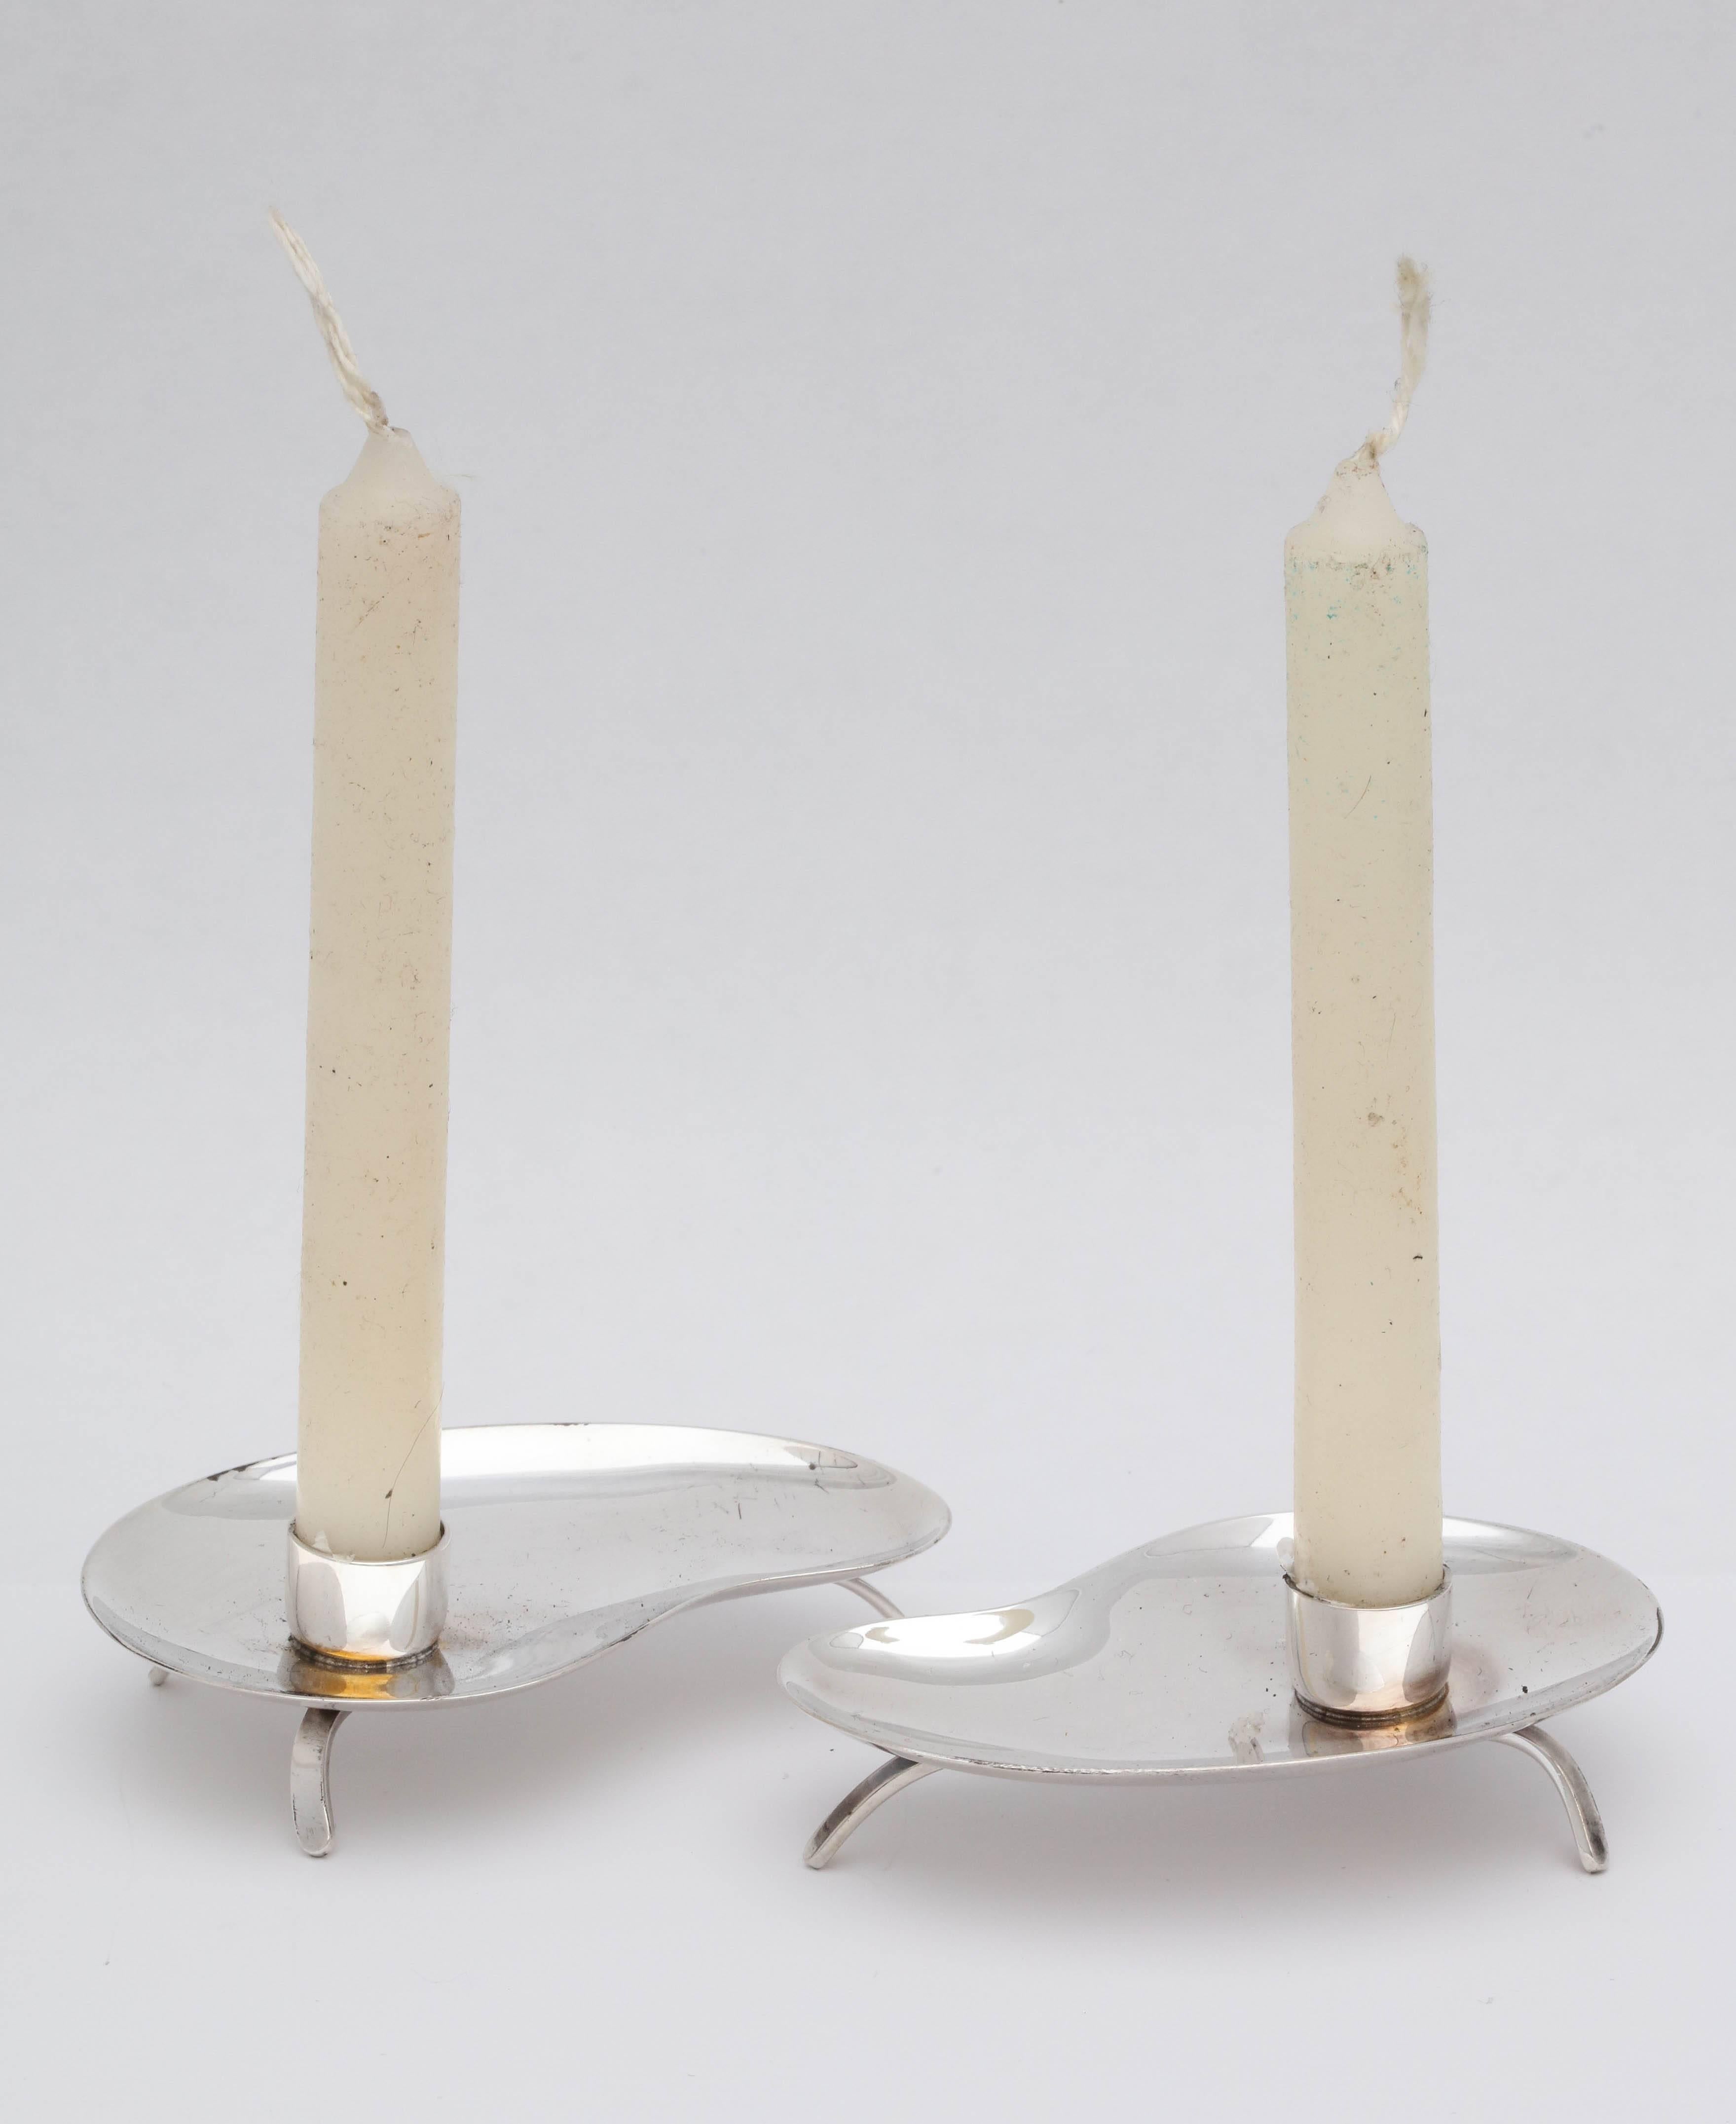 Mid-Century Modern, pair of sterling silver, footed candlesticks, Denmark, circa 1950s, Hugo Grun and Co. - makers. Each measures 3 inches wide (at widest point) x 2 inches deep (at deepest point) x 1 inch high at highest point. Pair weighs 1.740